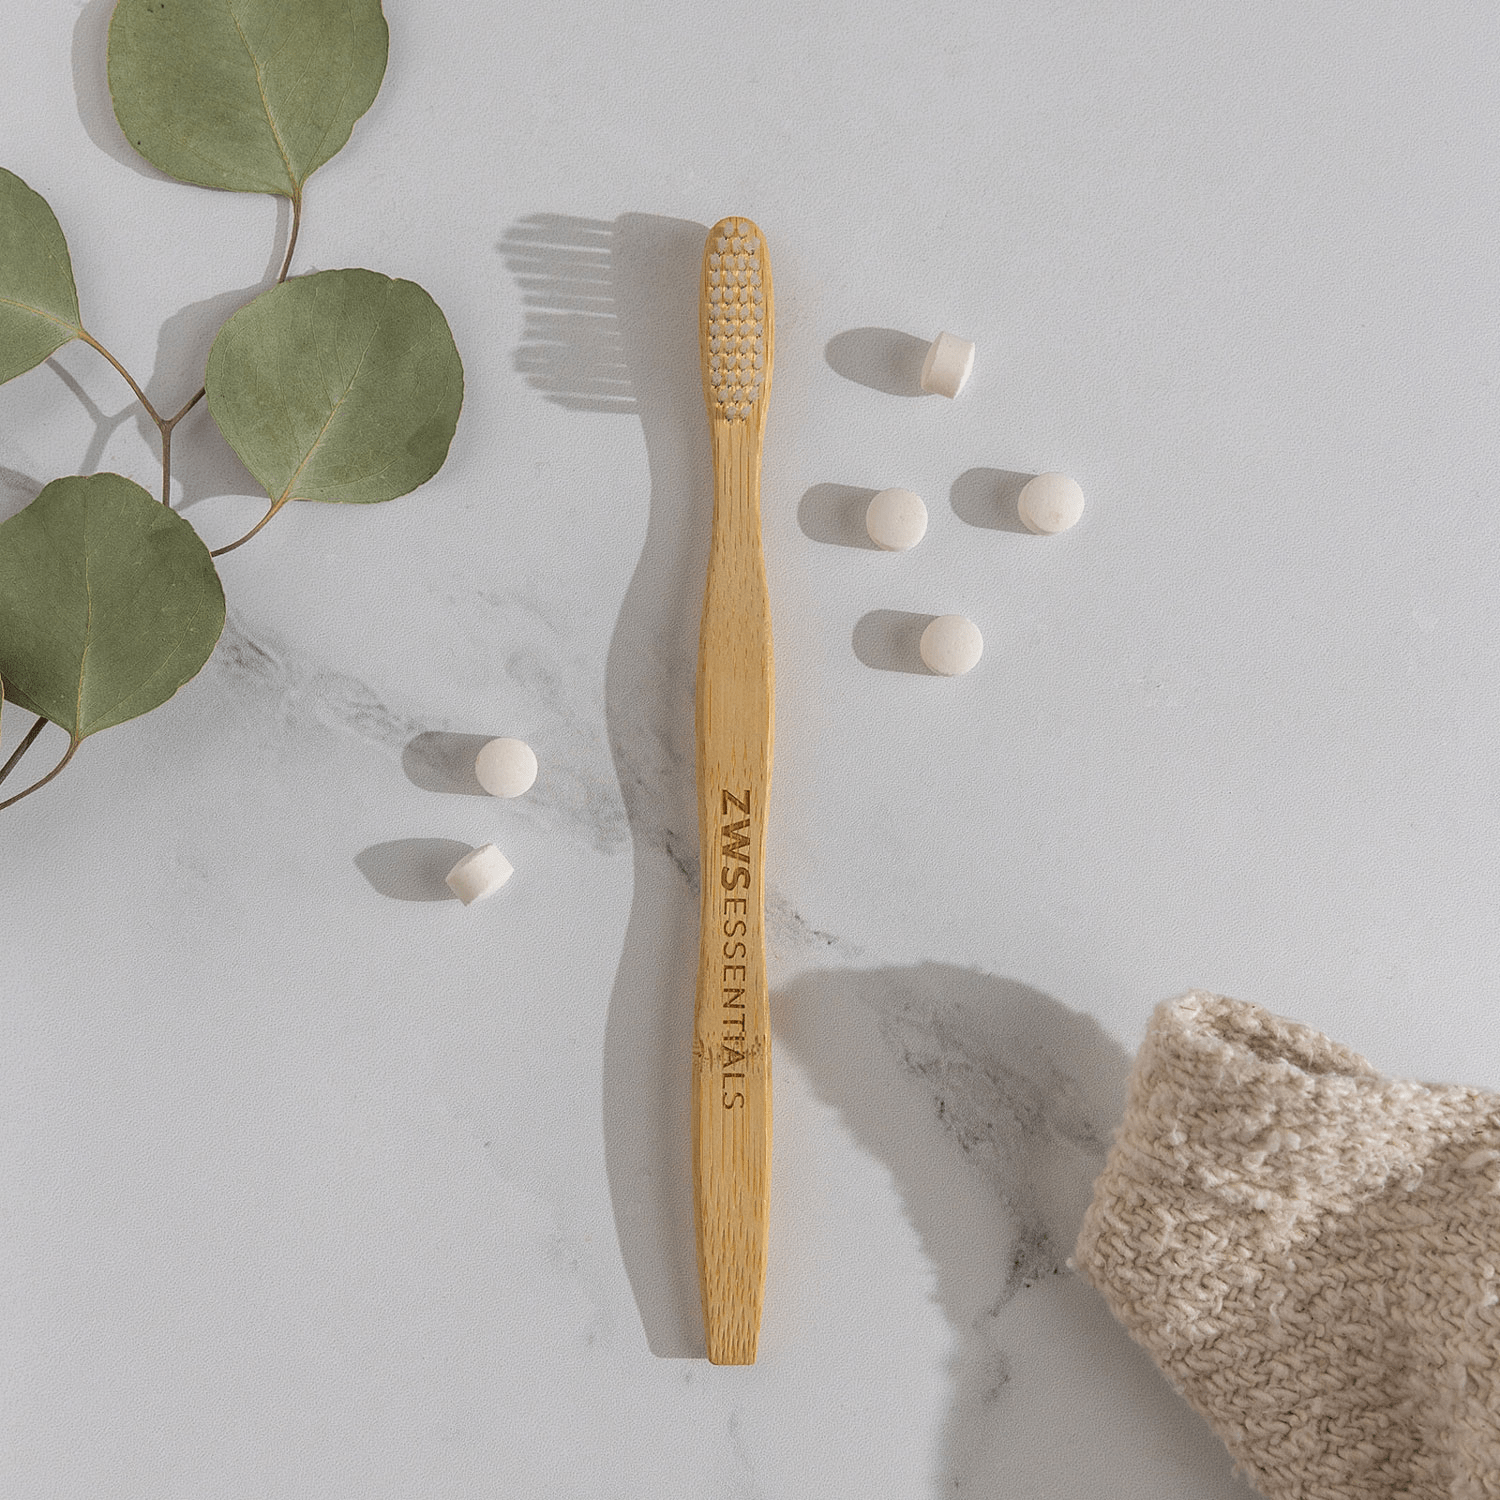 zero-waste-store-1-pack-bamboo-toothbrush-adult-zero-waste-toothbrush-plastic-free-compostable-castor-bean-bristles-30598072762479__PID:a5d3163e-1044-417f-b63b-7548b9e0b528